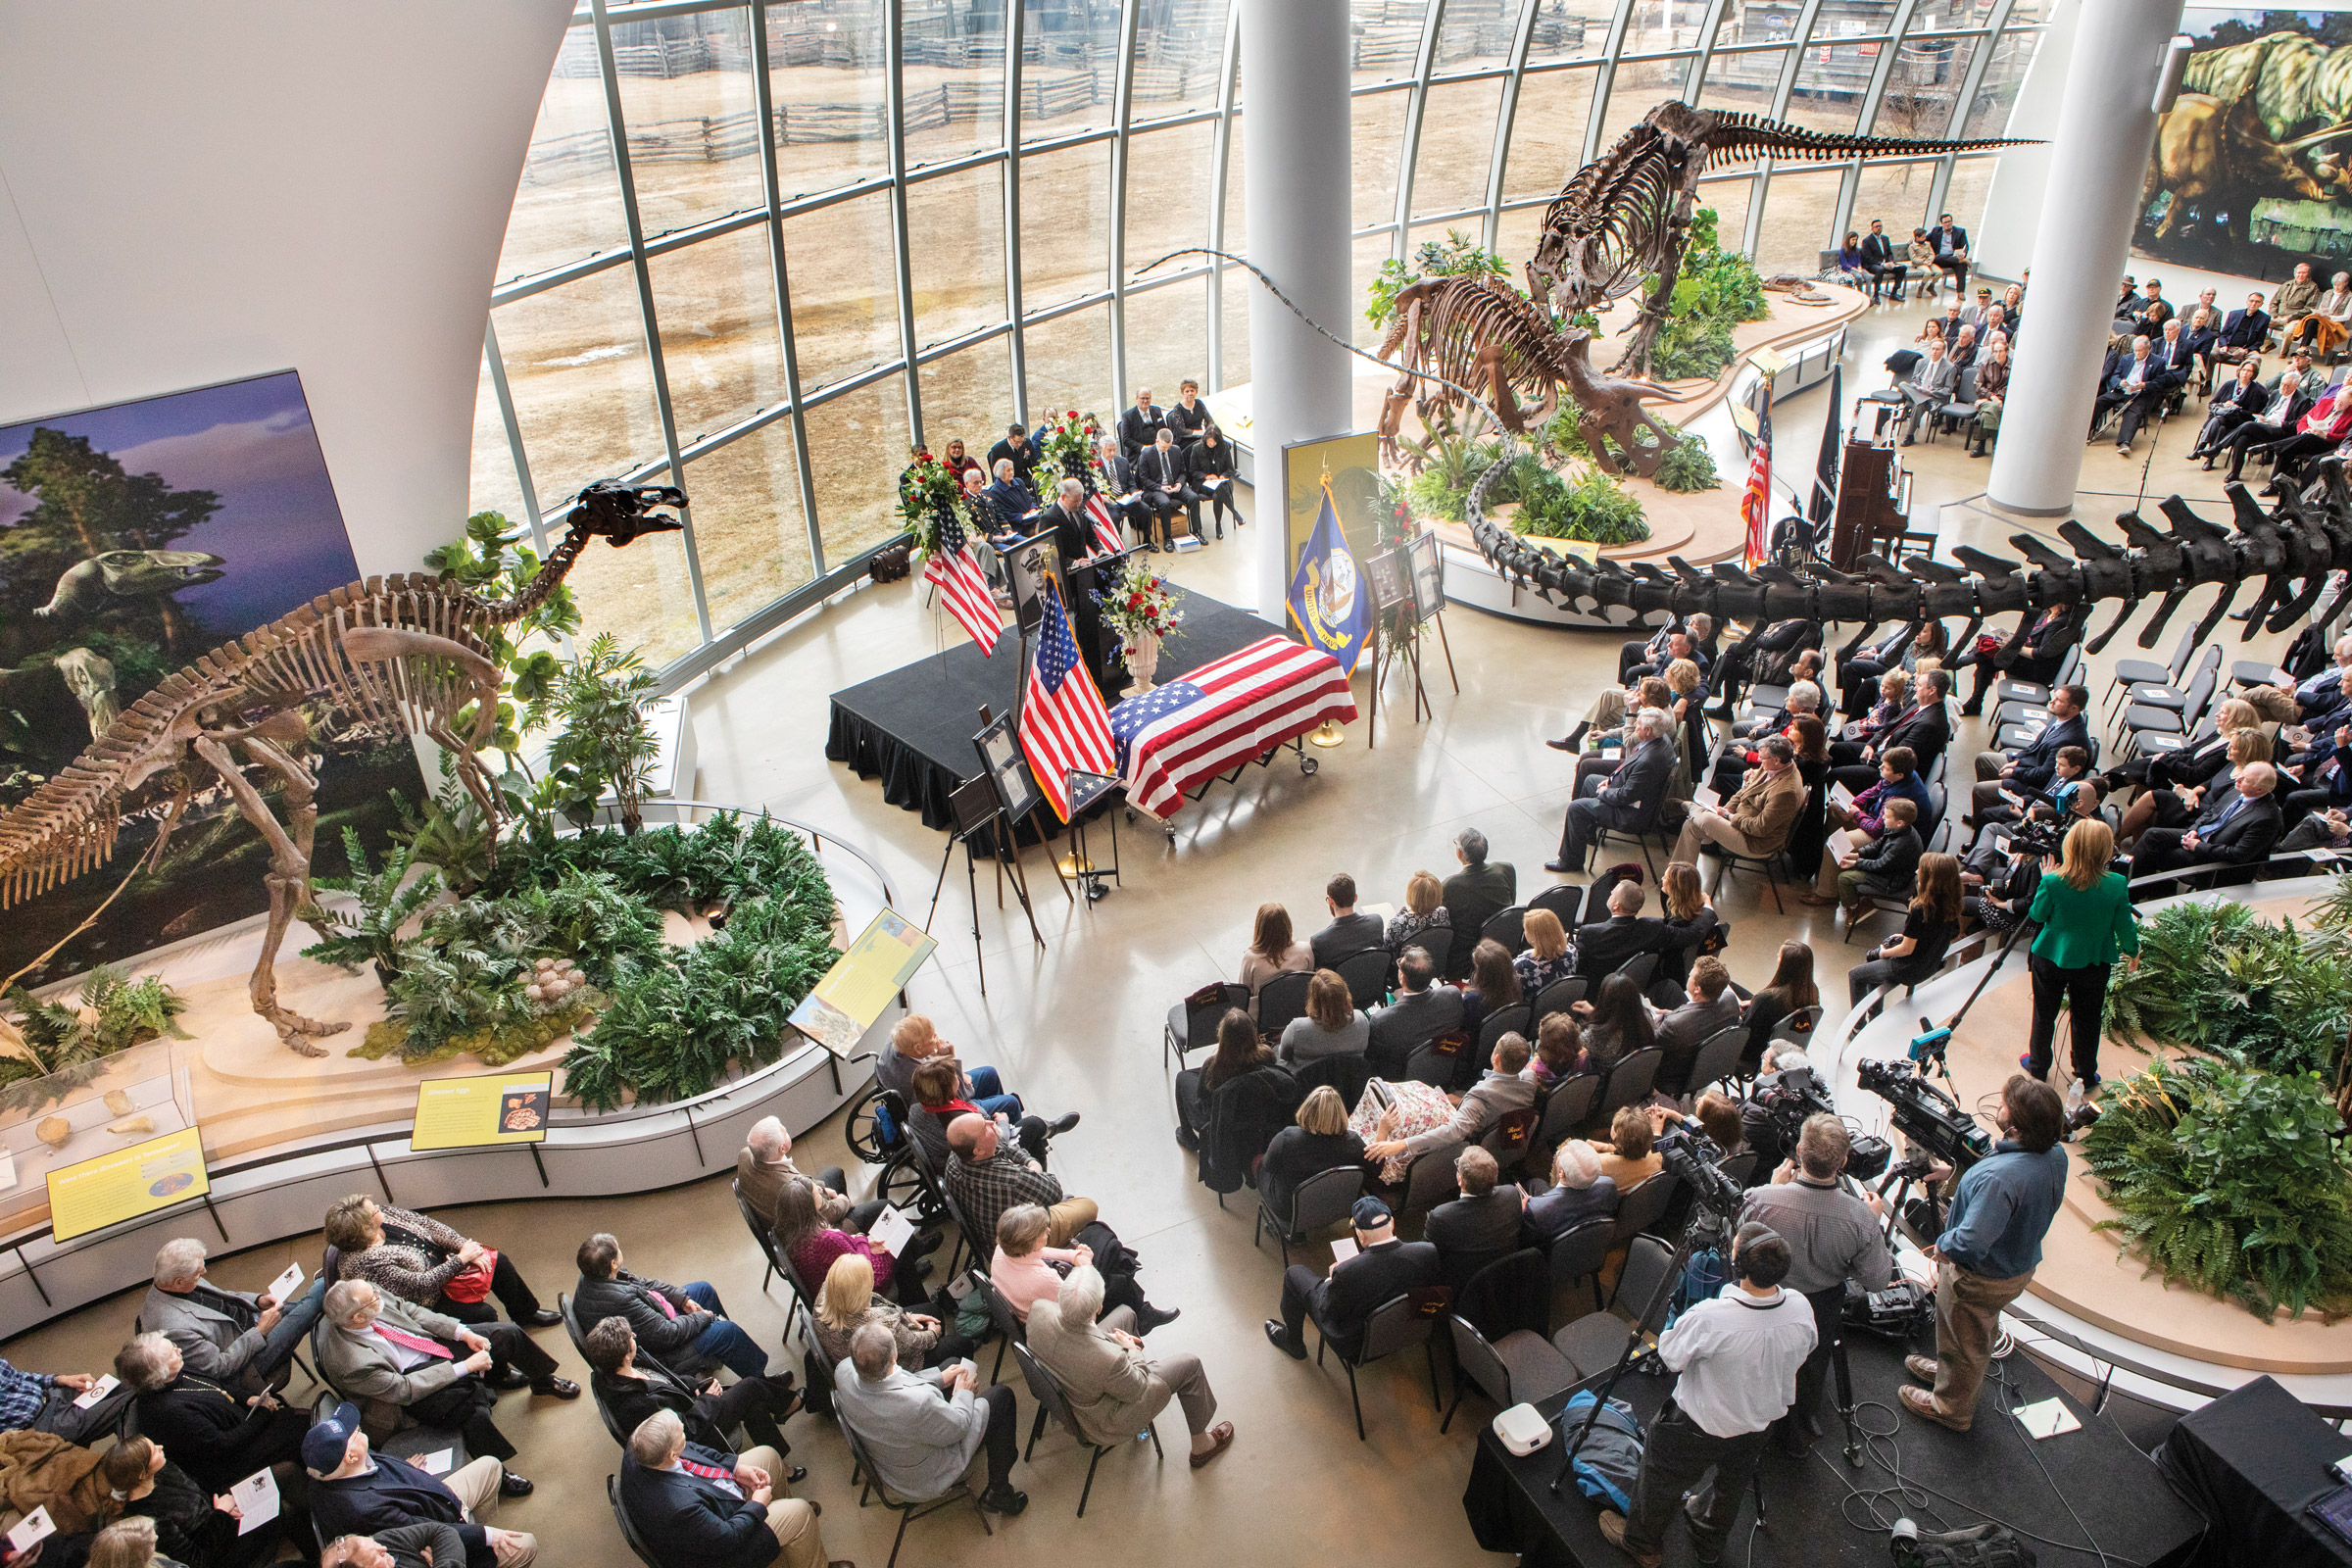 Mourners attending Lt. Richard “Tito” Lannom’s memorial service at Discovery Park of America filled all three floors of the museum.